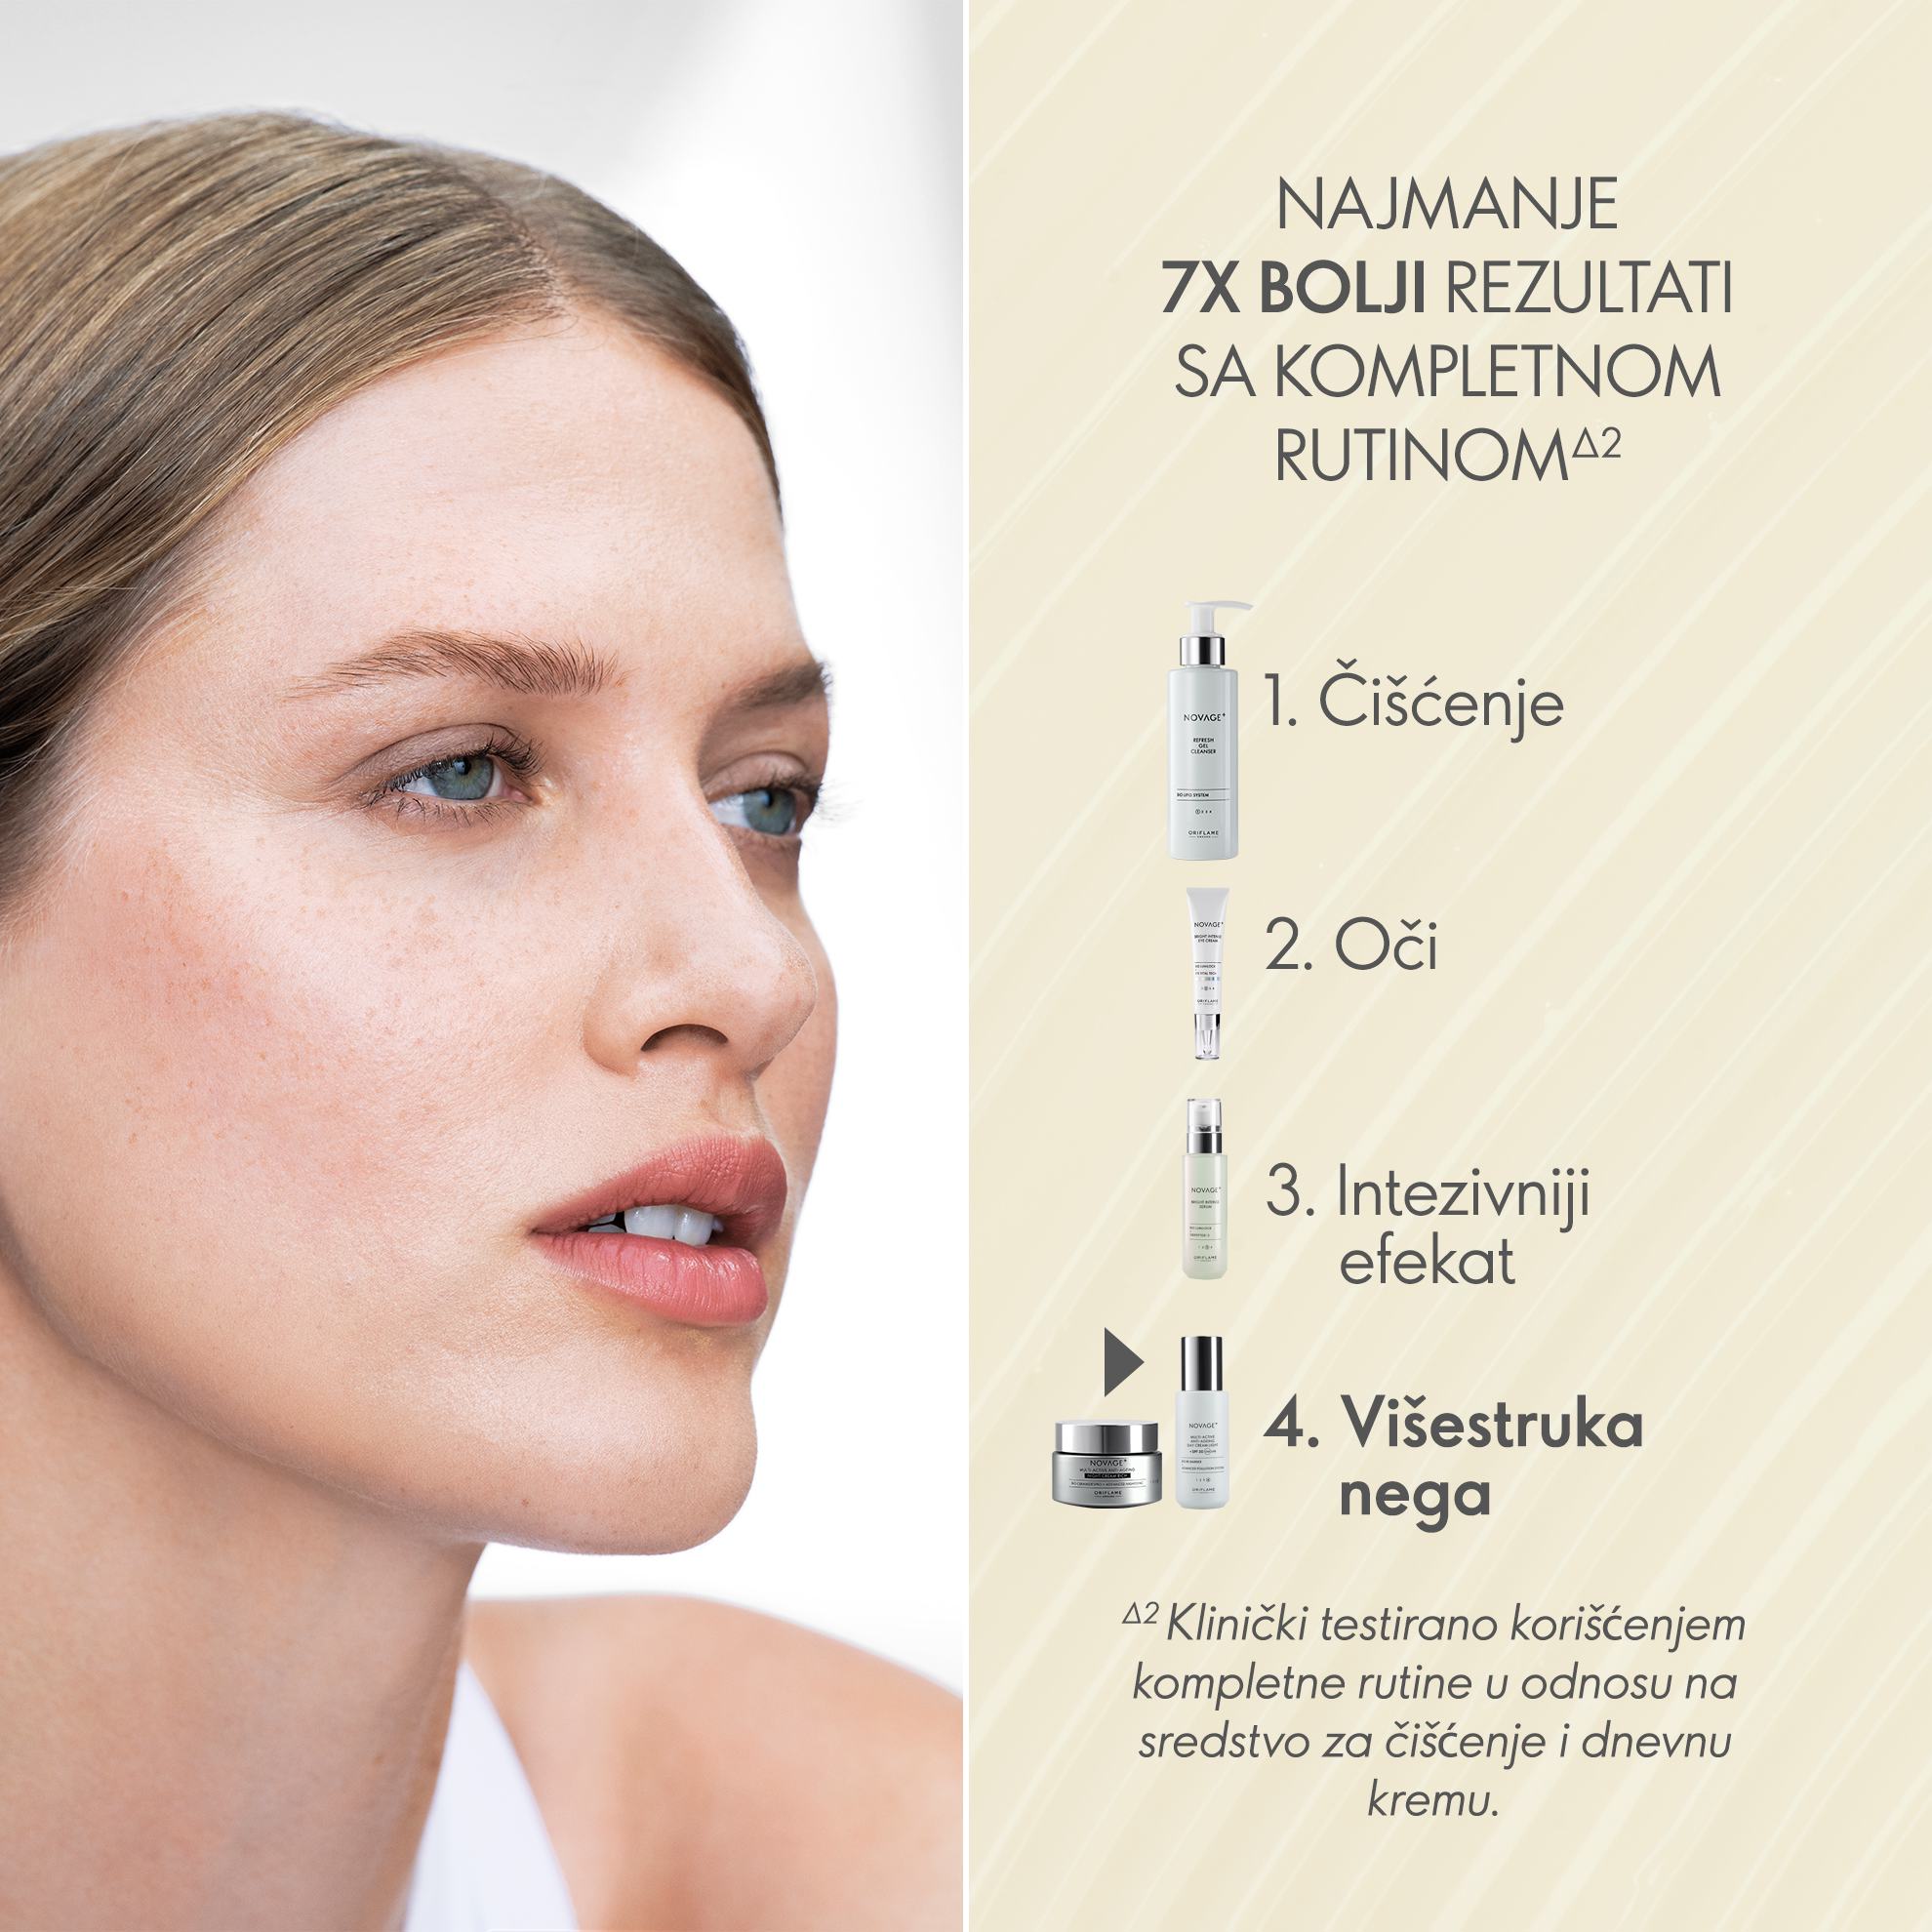 https://media-cdn.oriflame.com/productImage?externalMediaId=product-management-media%2fProducts%2f41044%2fRS%2f41044_5.png&id=17551285&version=2